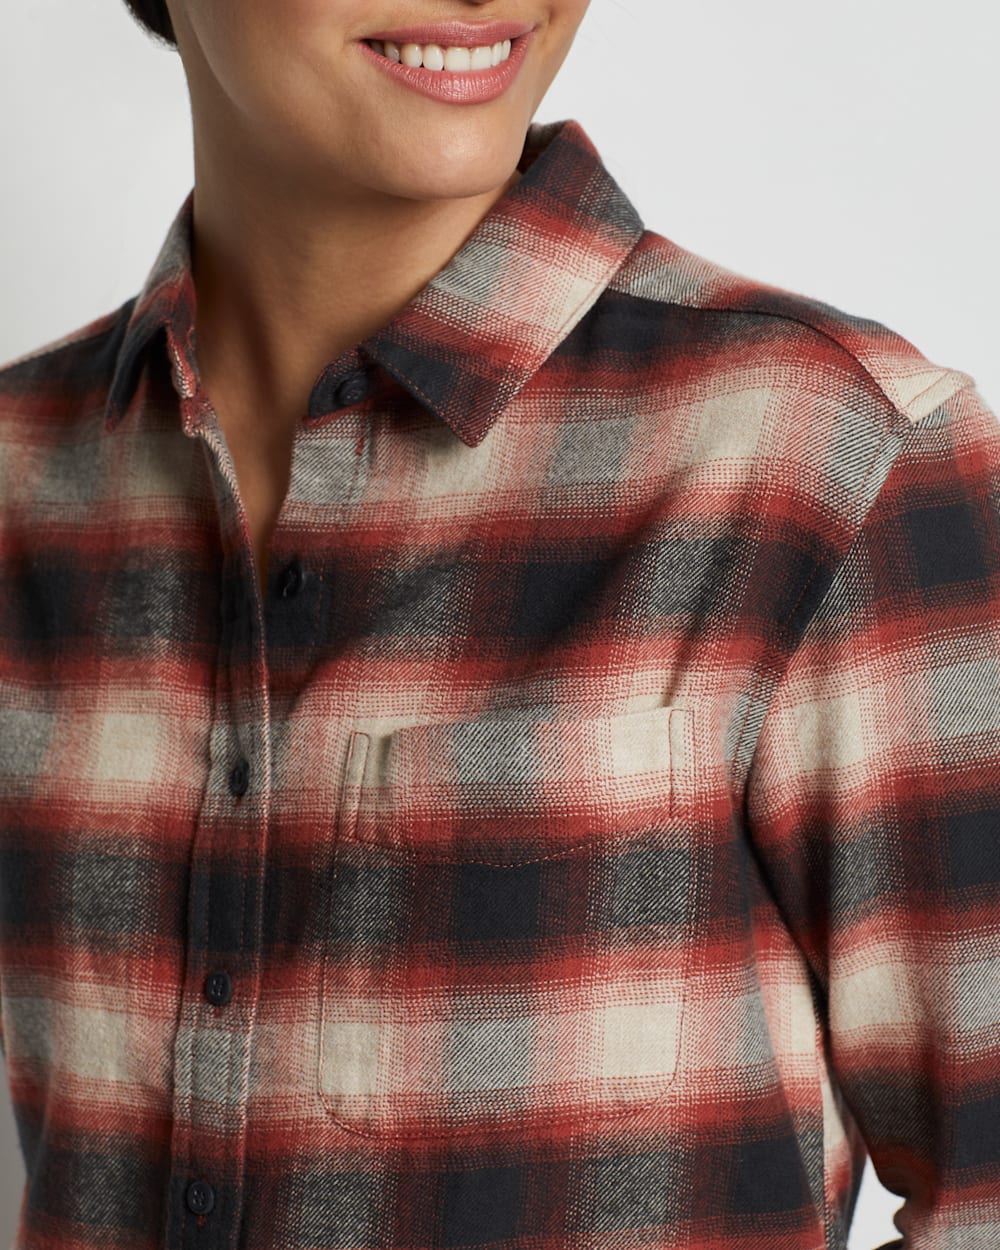 ALTERNATE VIEW OF WOMEN'S BOYFRIEND DOUBLEBRUSHED FLANNEL SHIRT IN RED/CHARCOAL PLAID image number 3